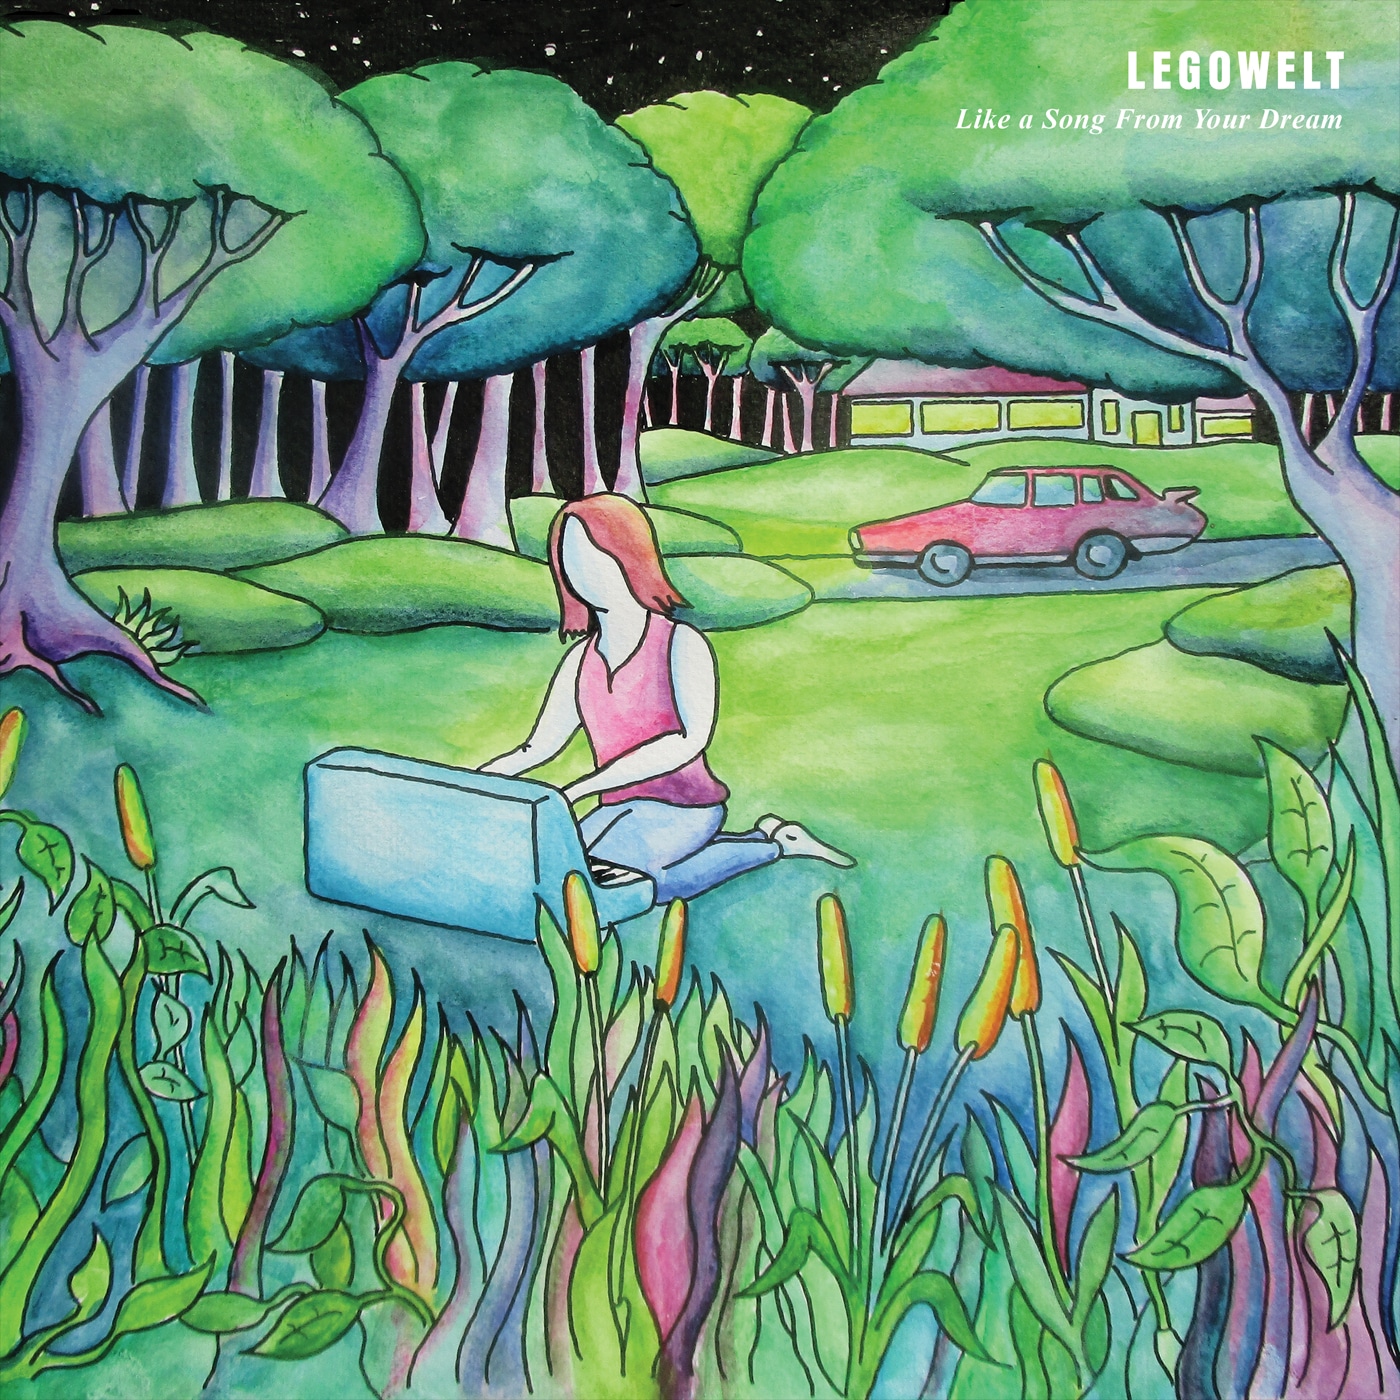 Legowelt – Like a Song From Your Dream